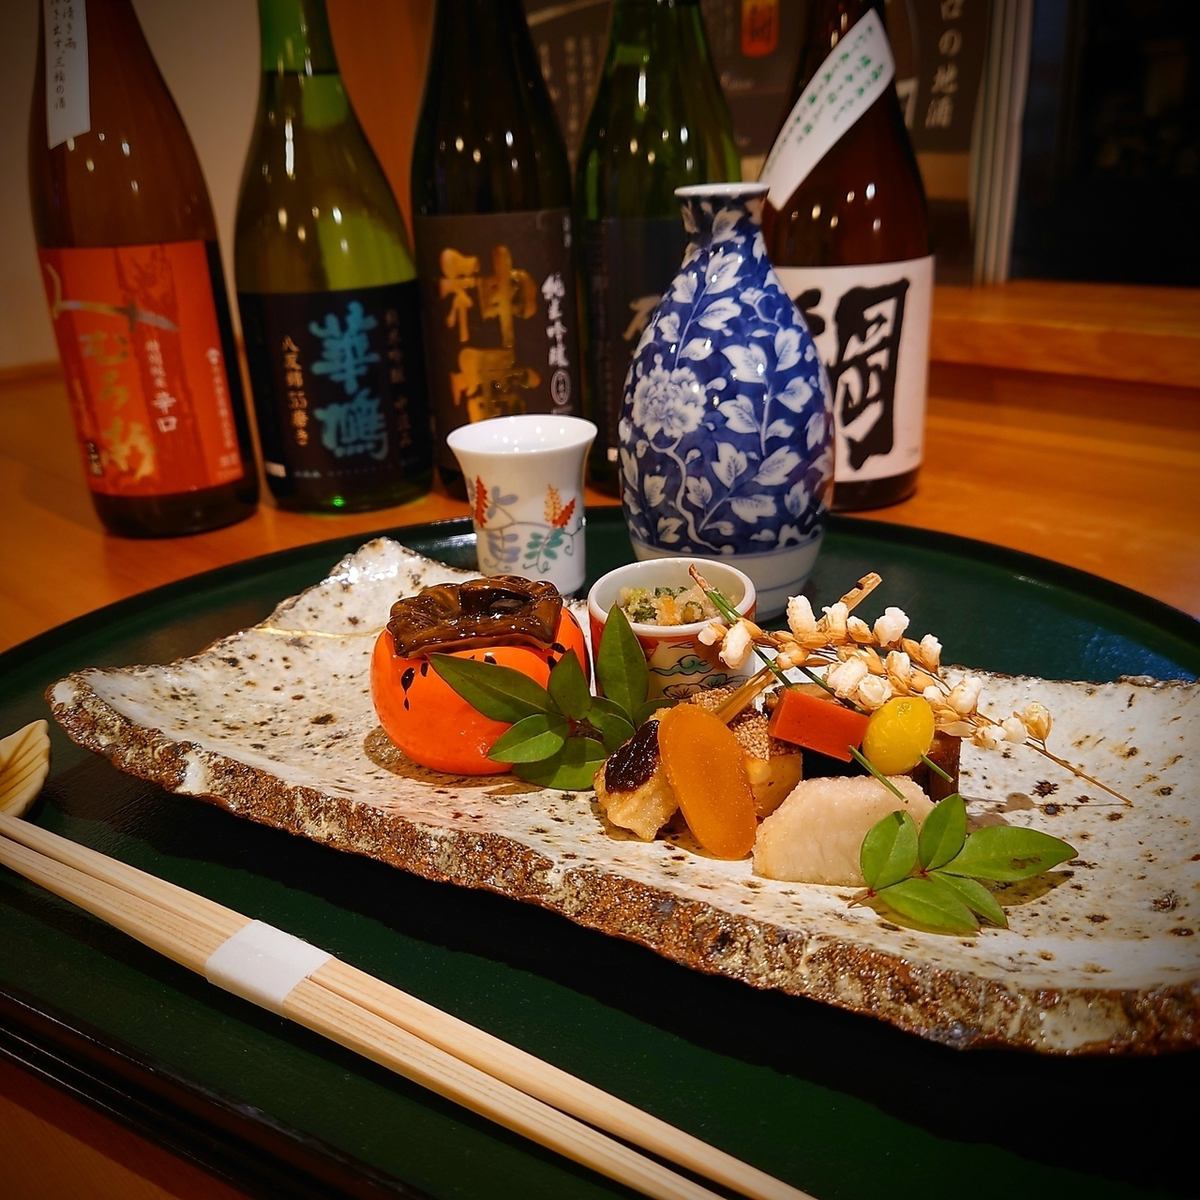 The scent of wood in the store.Enjoy delicious Japanese cuisine in a relaxed atmosphere.